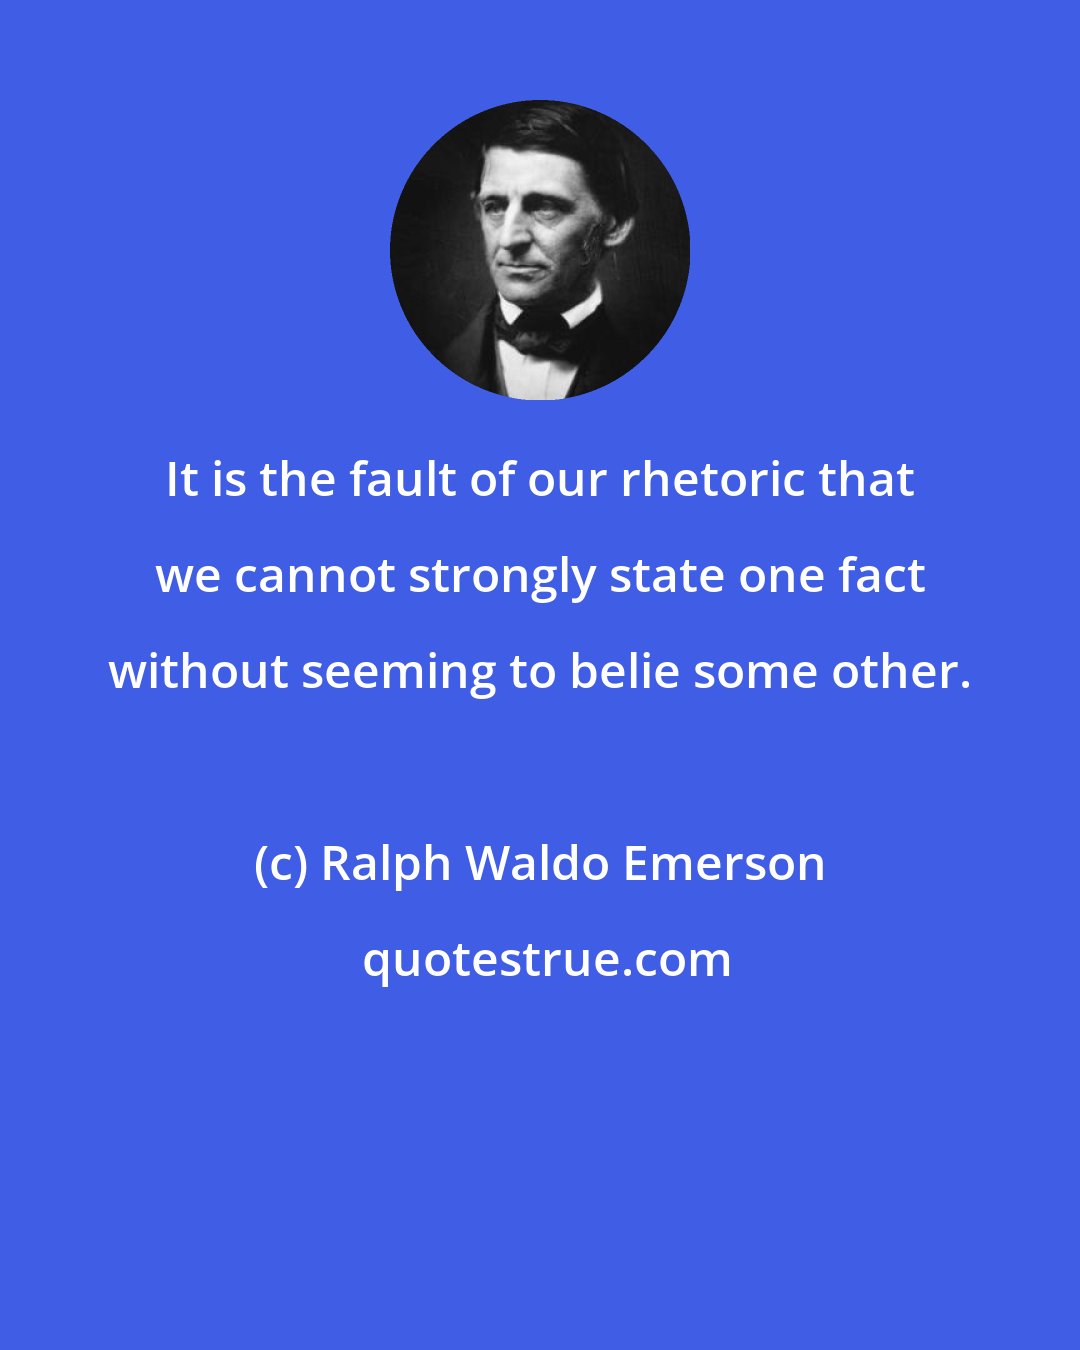 Ralph Waldo Emerson: It is the fault of our rhetoric that we cannot strongly state one fact without seeming to belie some other.